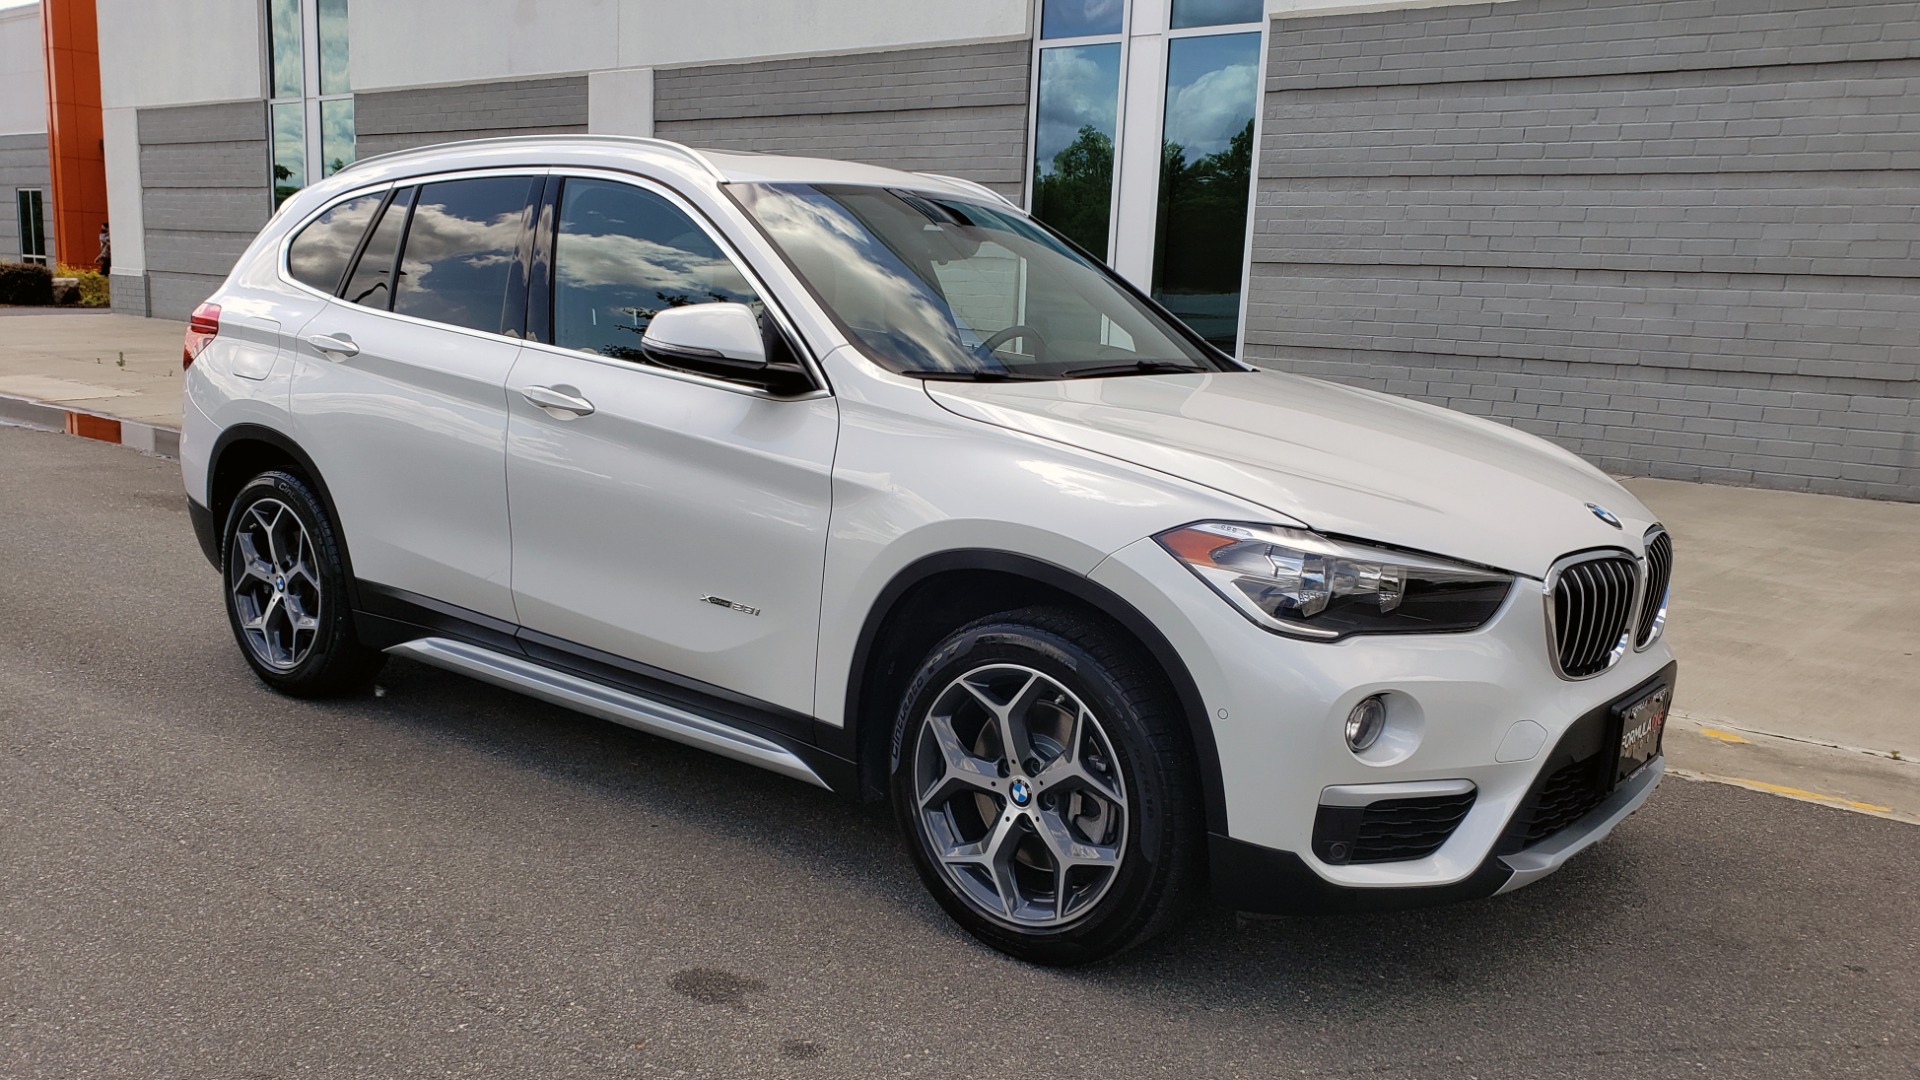 Used 2018 BMW X1 XDRIVE28I / NAV / CONV PKG / HTD SEATS / APPLE / PANO-ROOF / REARVIEW for sale Sold at Formula Imports in Charlotte NC 28227 7